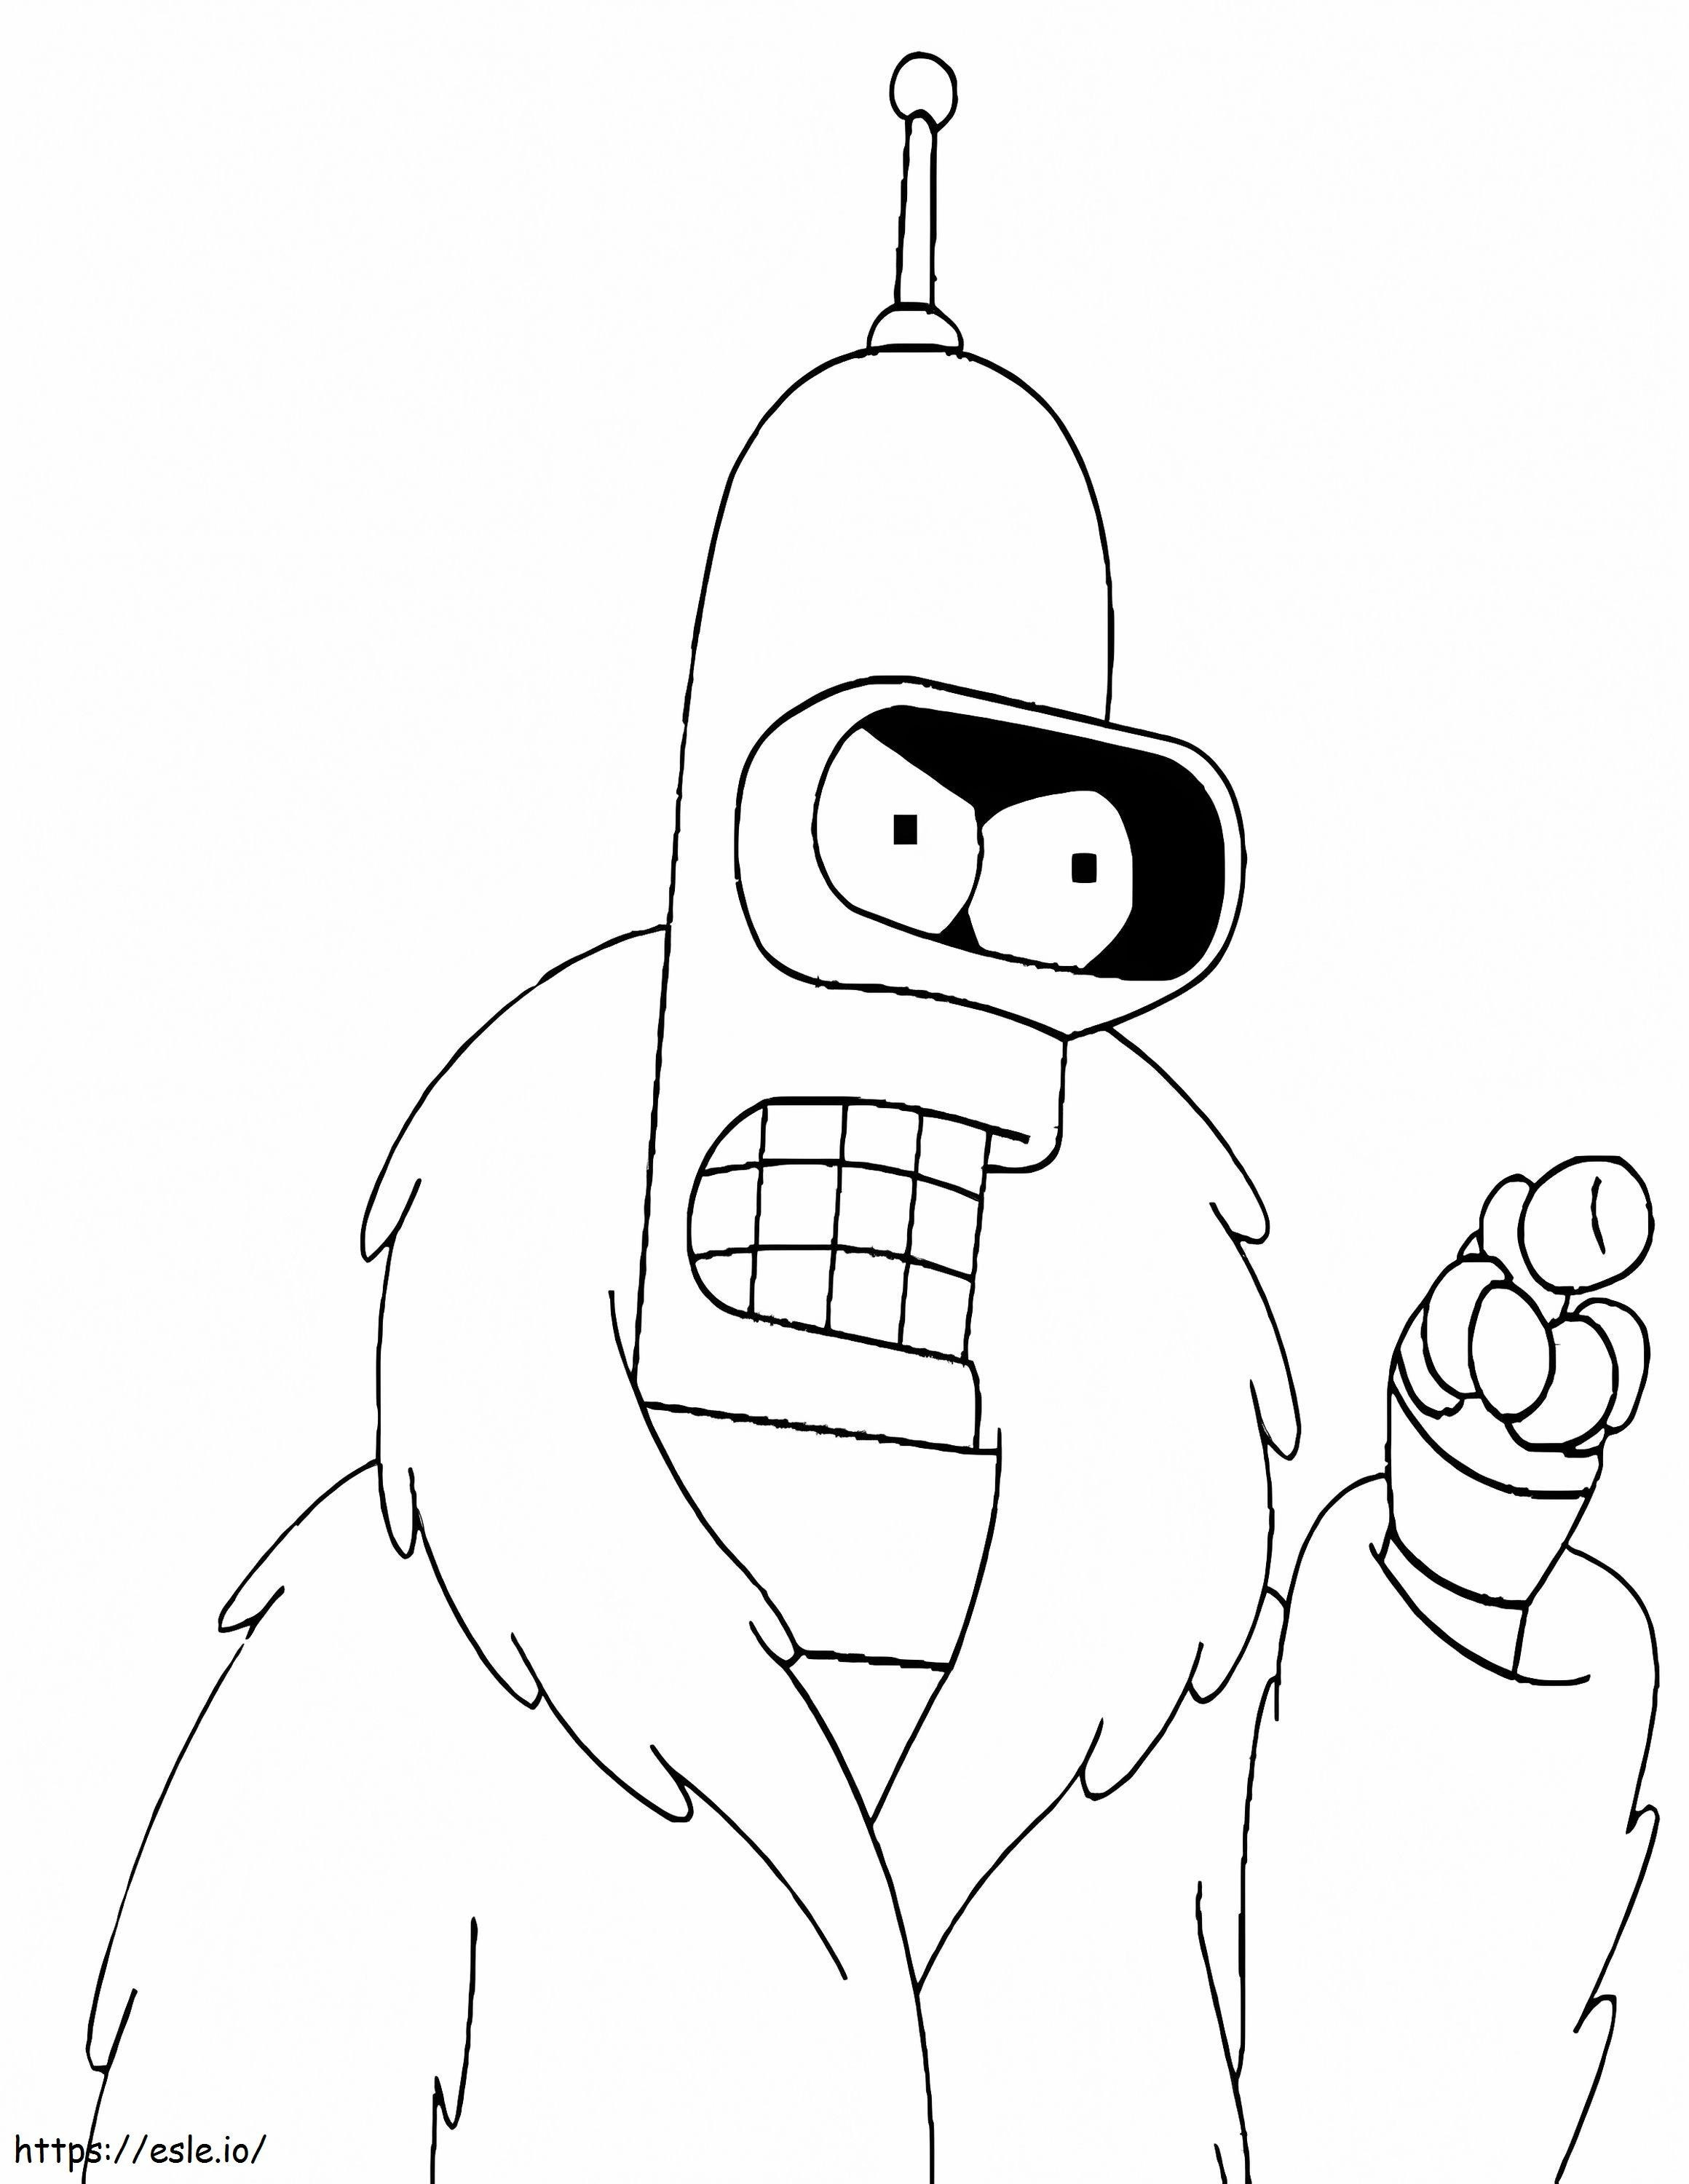 Angry Bender coloring page